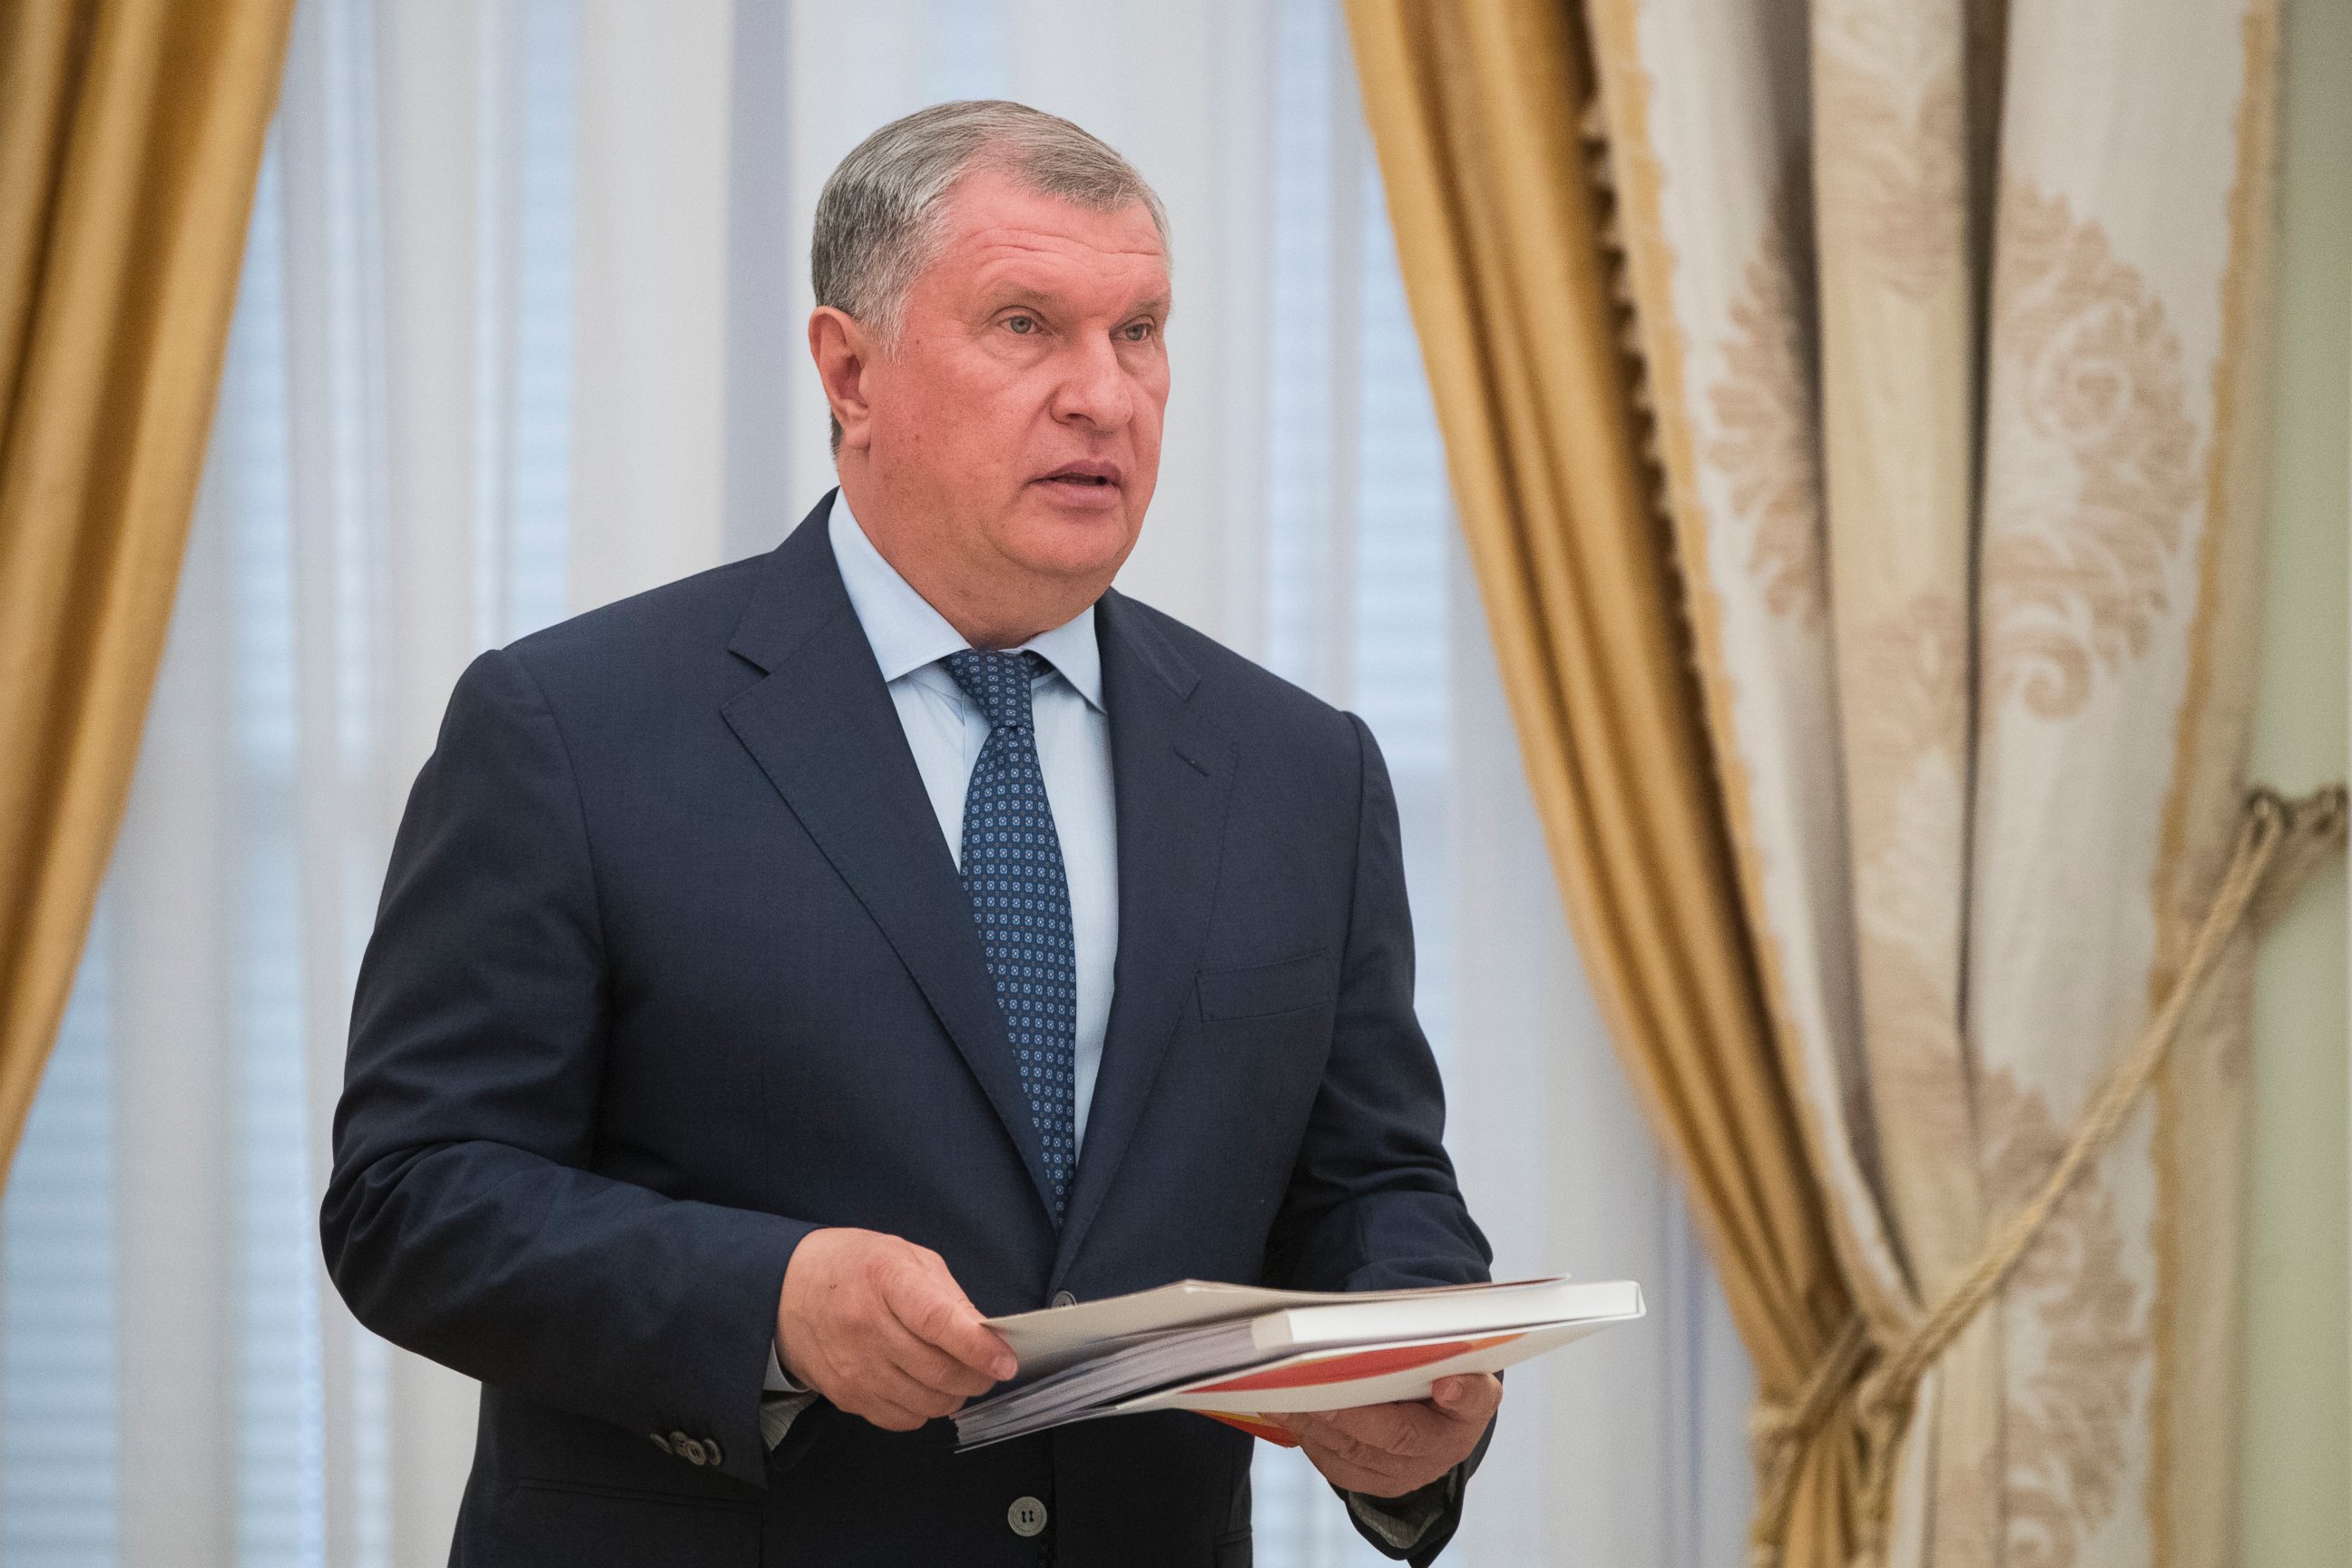 CEO of state-controlled Russian oil company Rosneft, Igor Sechin, holds papers prior a meeting with Saudi Deputy Crown Prince and Defense Minister Mohammed bin Salman in Moscow's Kremlin, Russia, Tuesday, May 30, 2017.